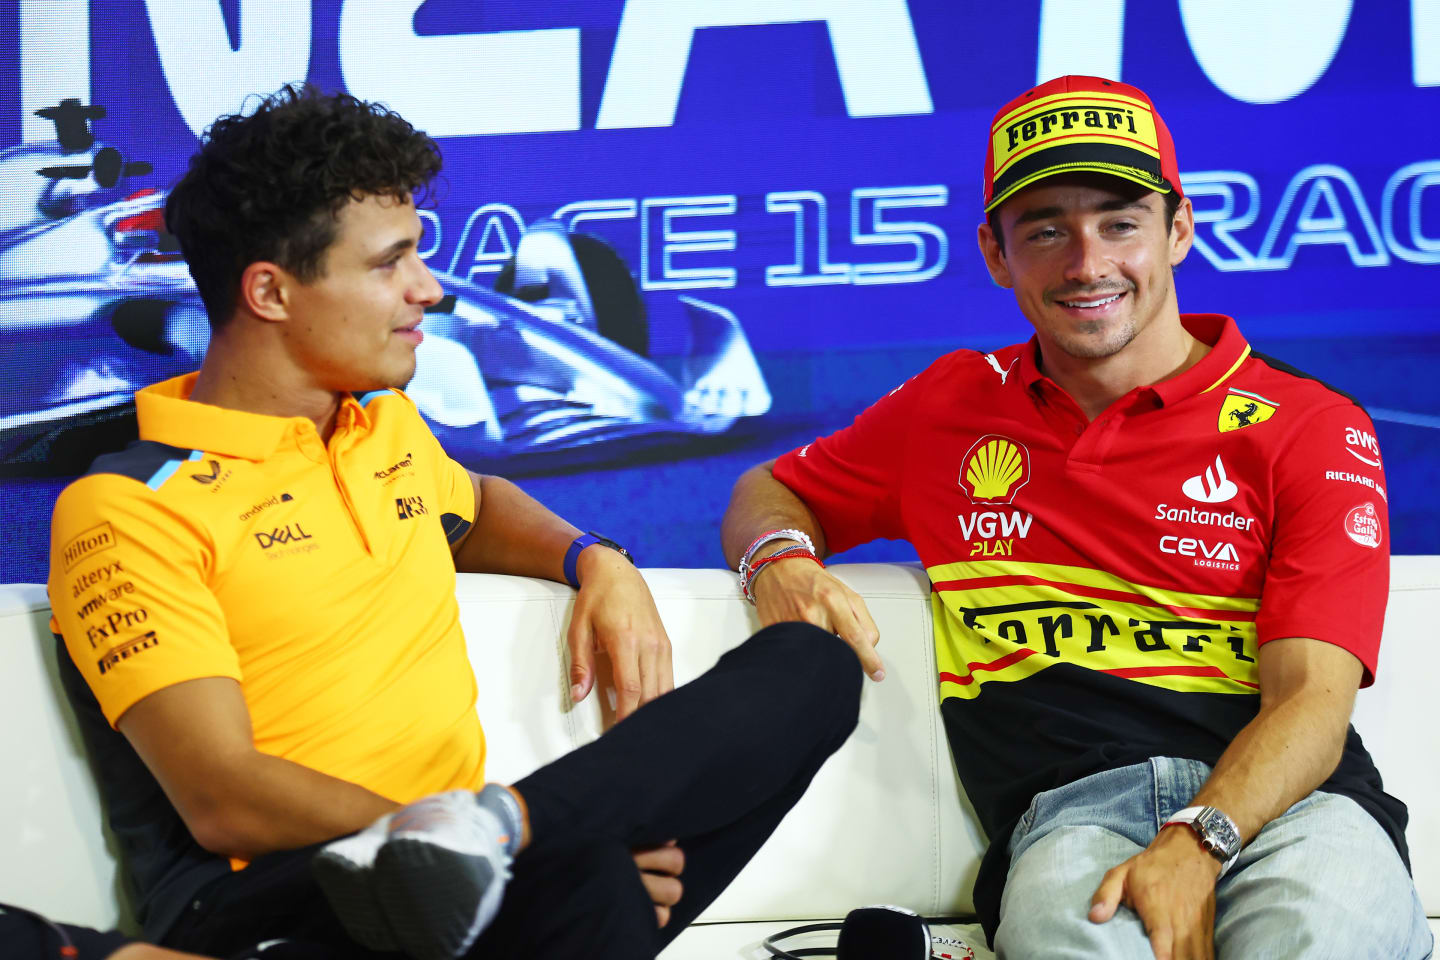 MONZA, ITALY - AUGUST 31: Charles Leclerc of Monaco and Ferrari and Lando Norris of Great Britain and McLaren talk in the Drivers Press Conference during previews ahead of the F1 Grand Prix of Italy at Autodromo Nazionale Monza on August 31, 2023 in Monza, Italy. (Photo by Bryn Lennon/Getty Images)